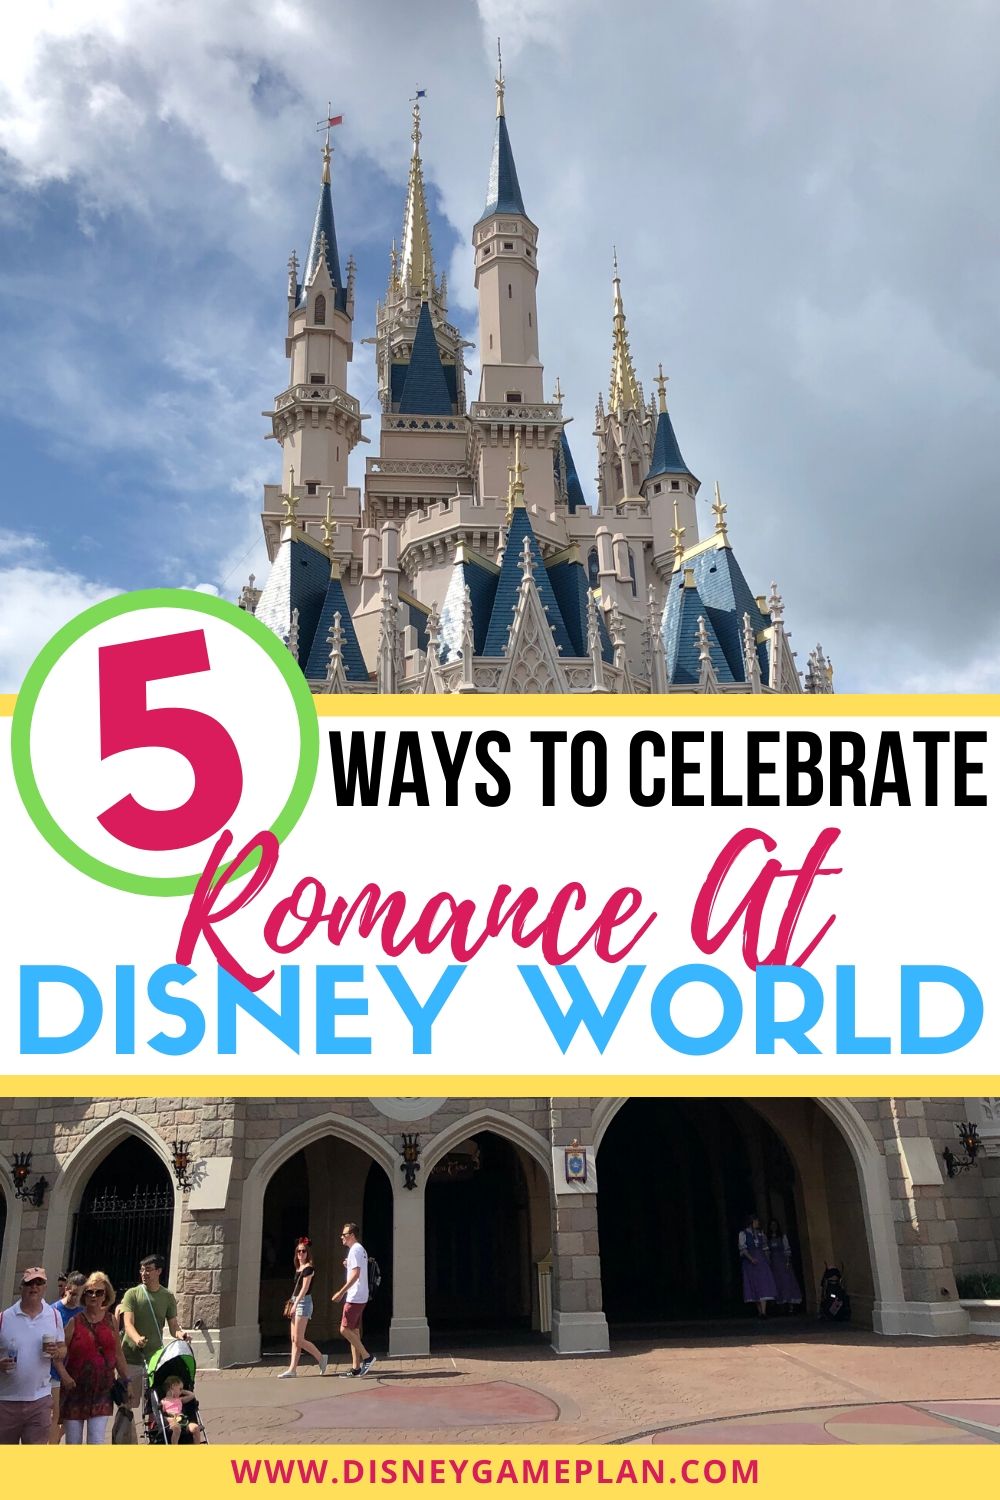 Disney World perfect Romantic Getaway for couples. it is so easy to get swept up in the magic. Disney World It's not just a family vacation destination, but a perfect place for couples to visit.